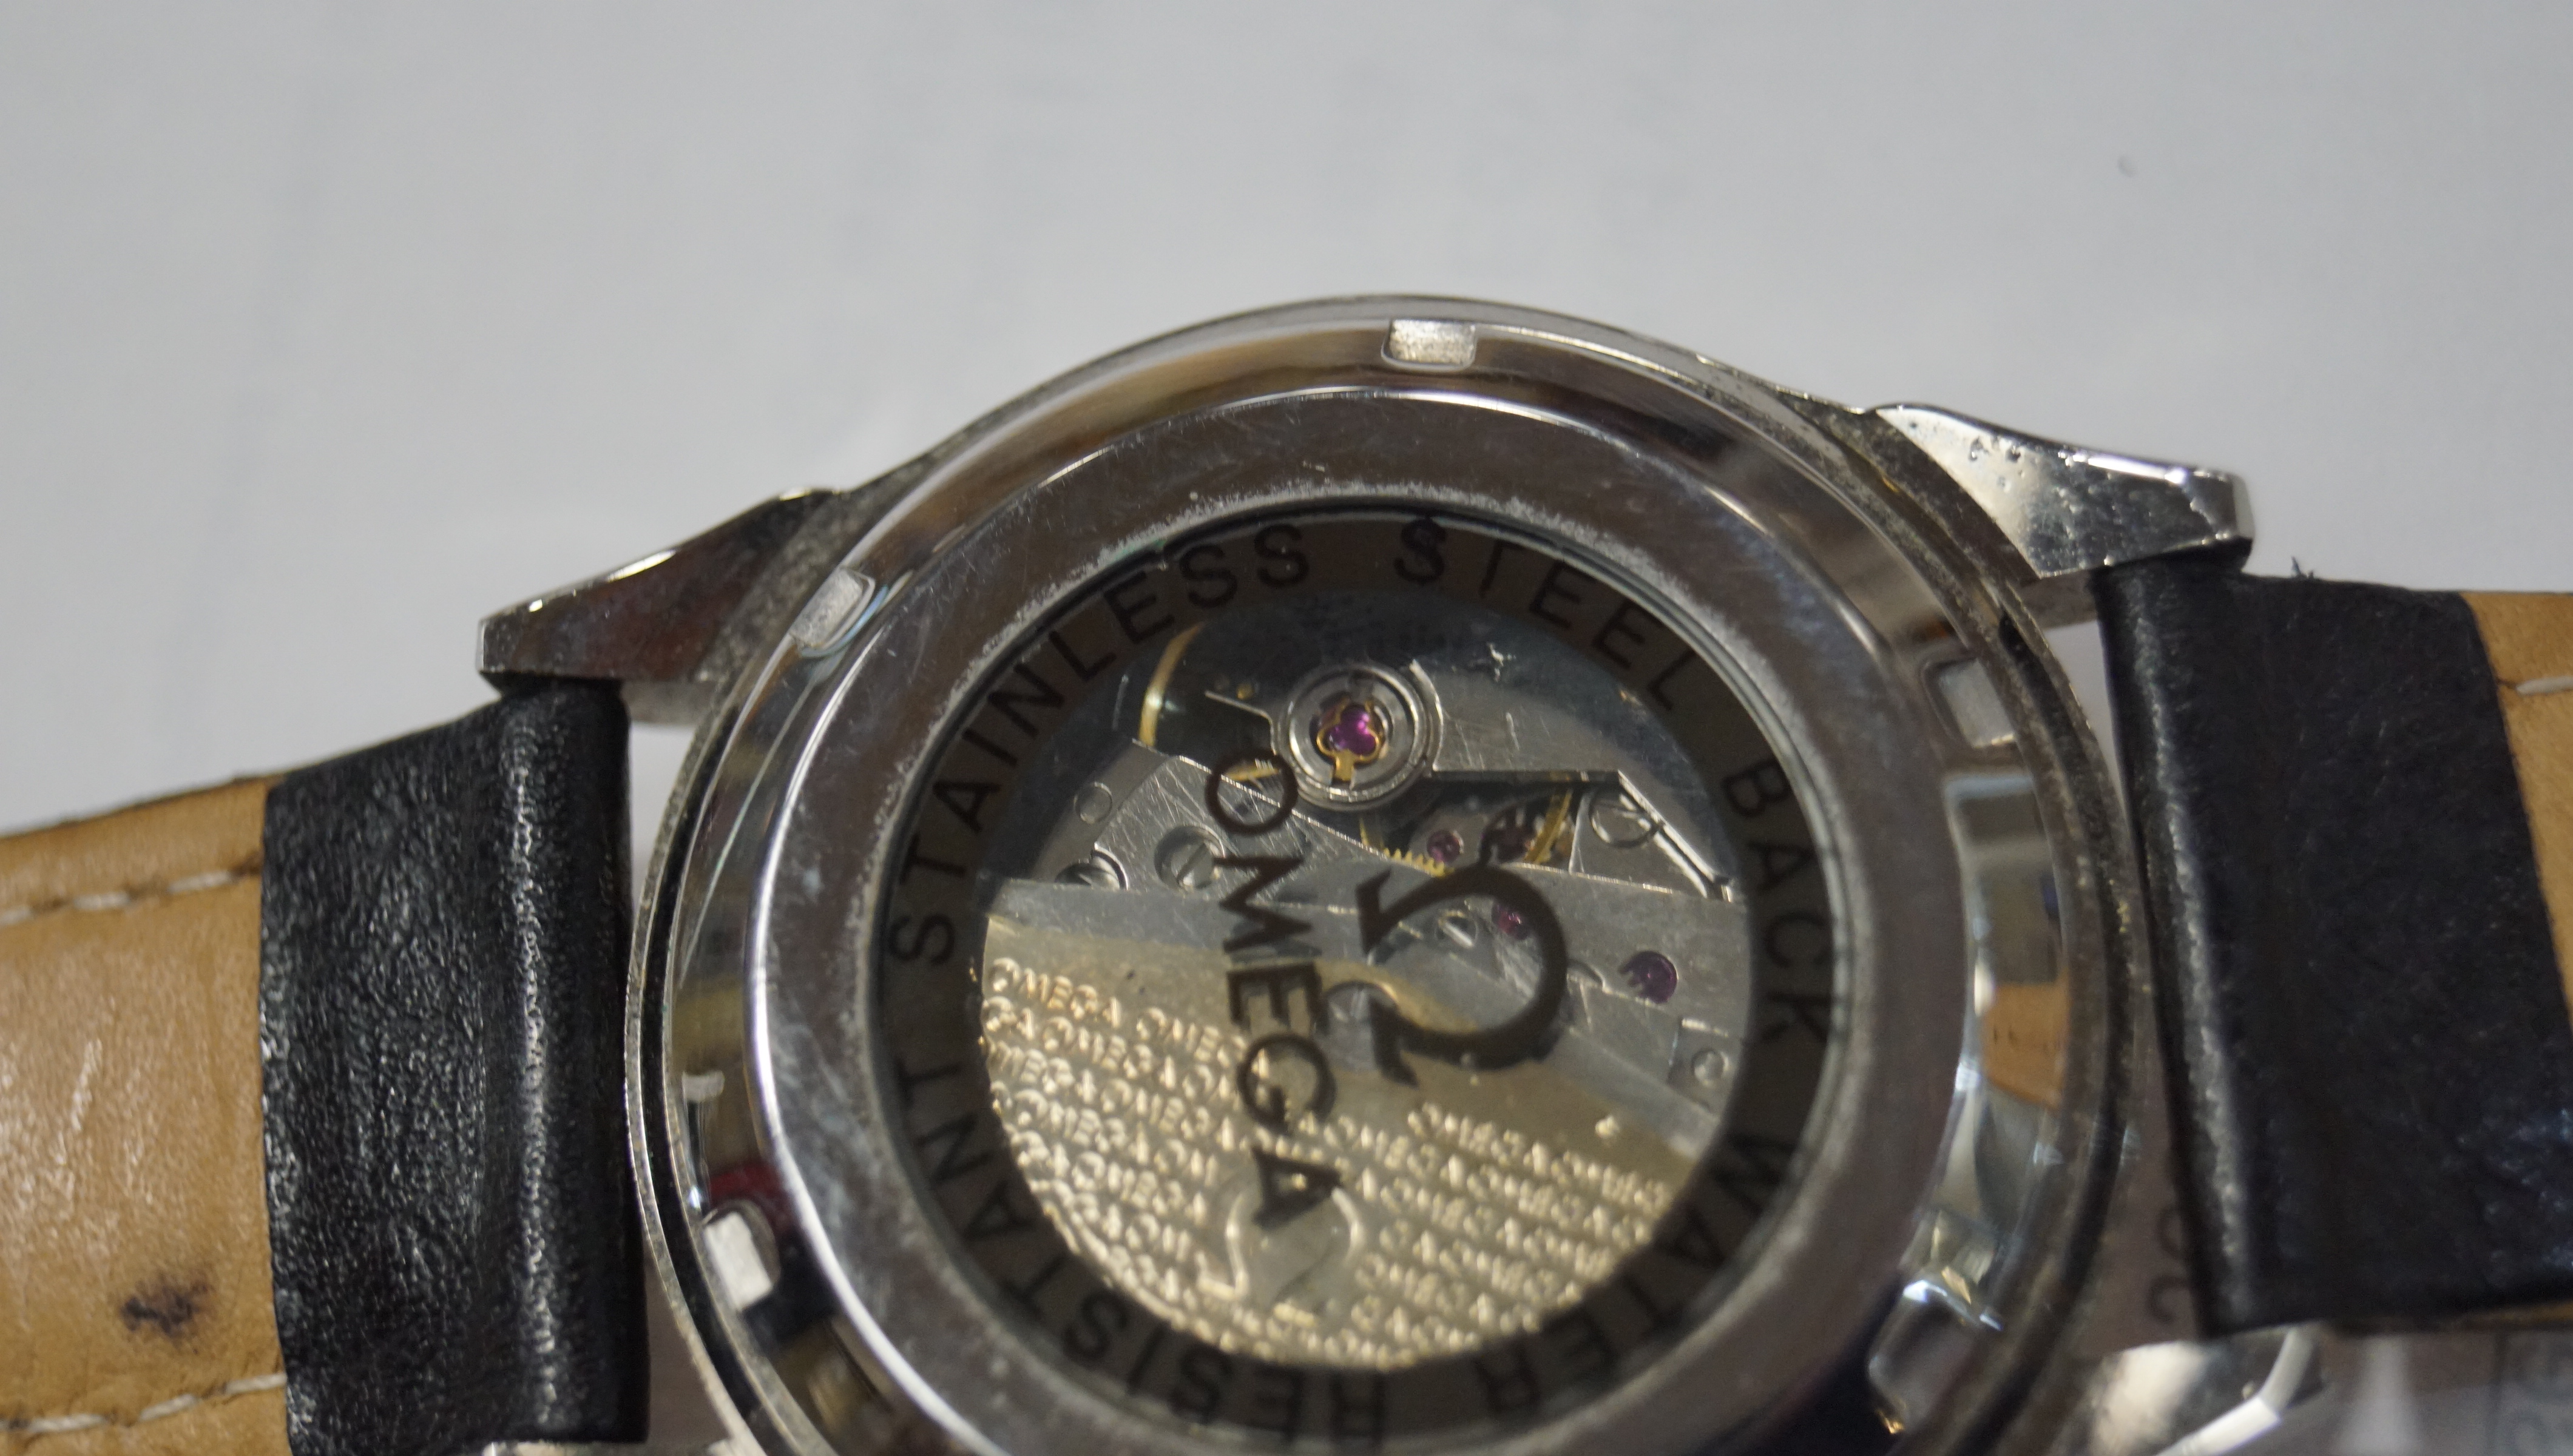 A collection of assorted wrist watches, including: a Citizens Eco Drive, Christian Lars, - Image 6 of 7